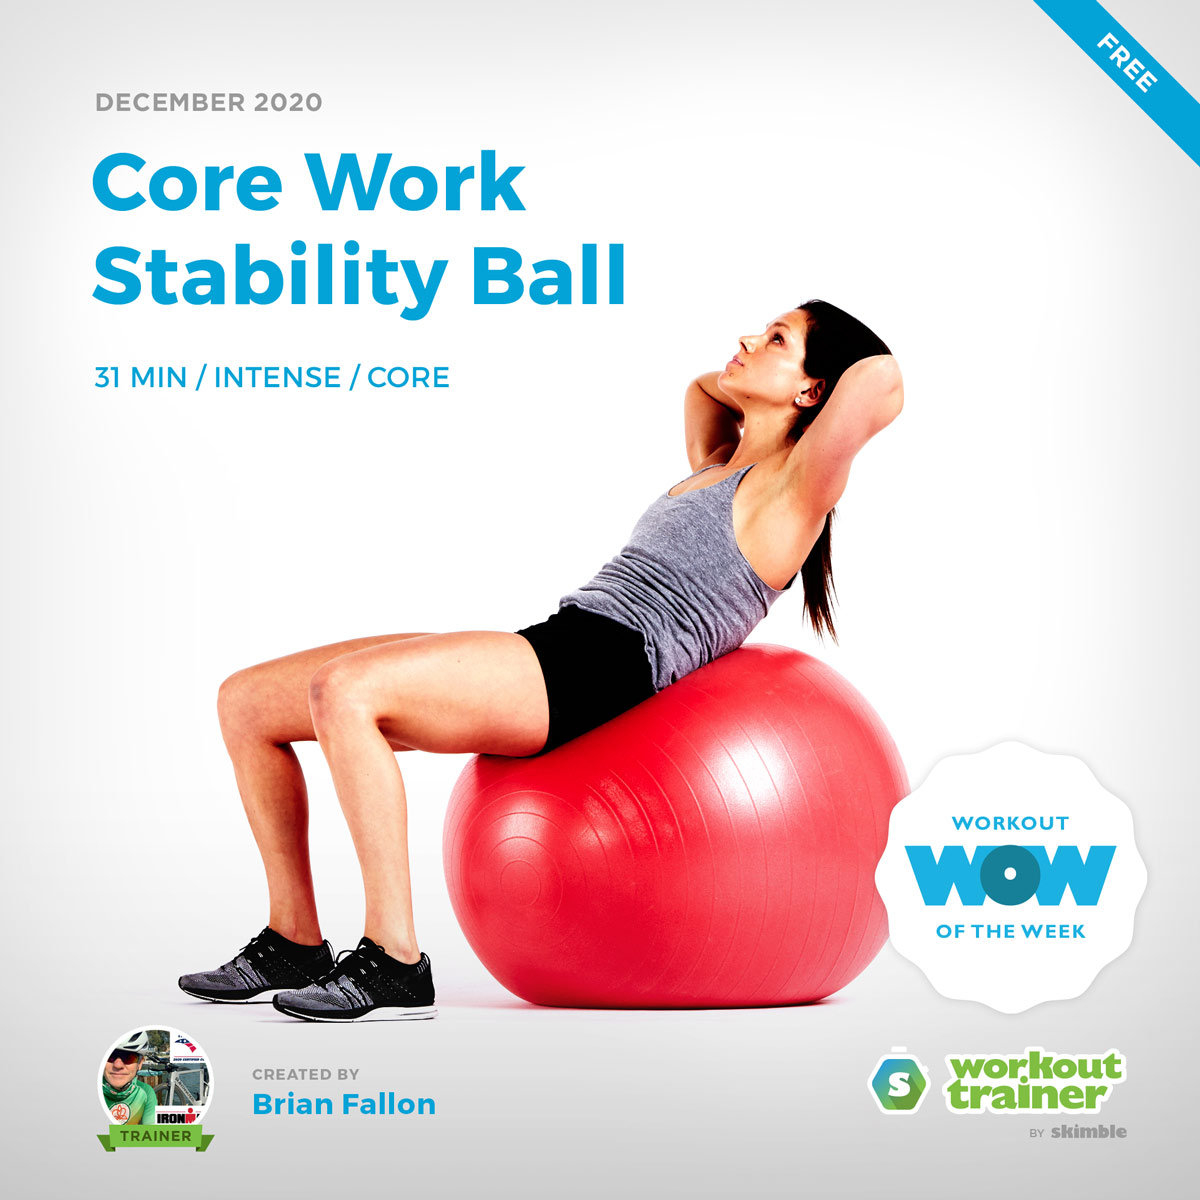 medicine ball - Workout Collection - Workout Trainer by Skimble